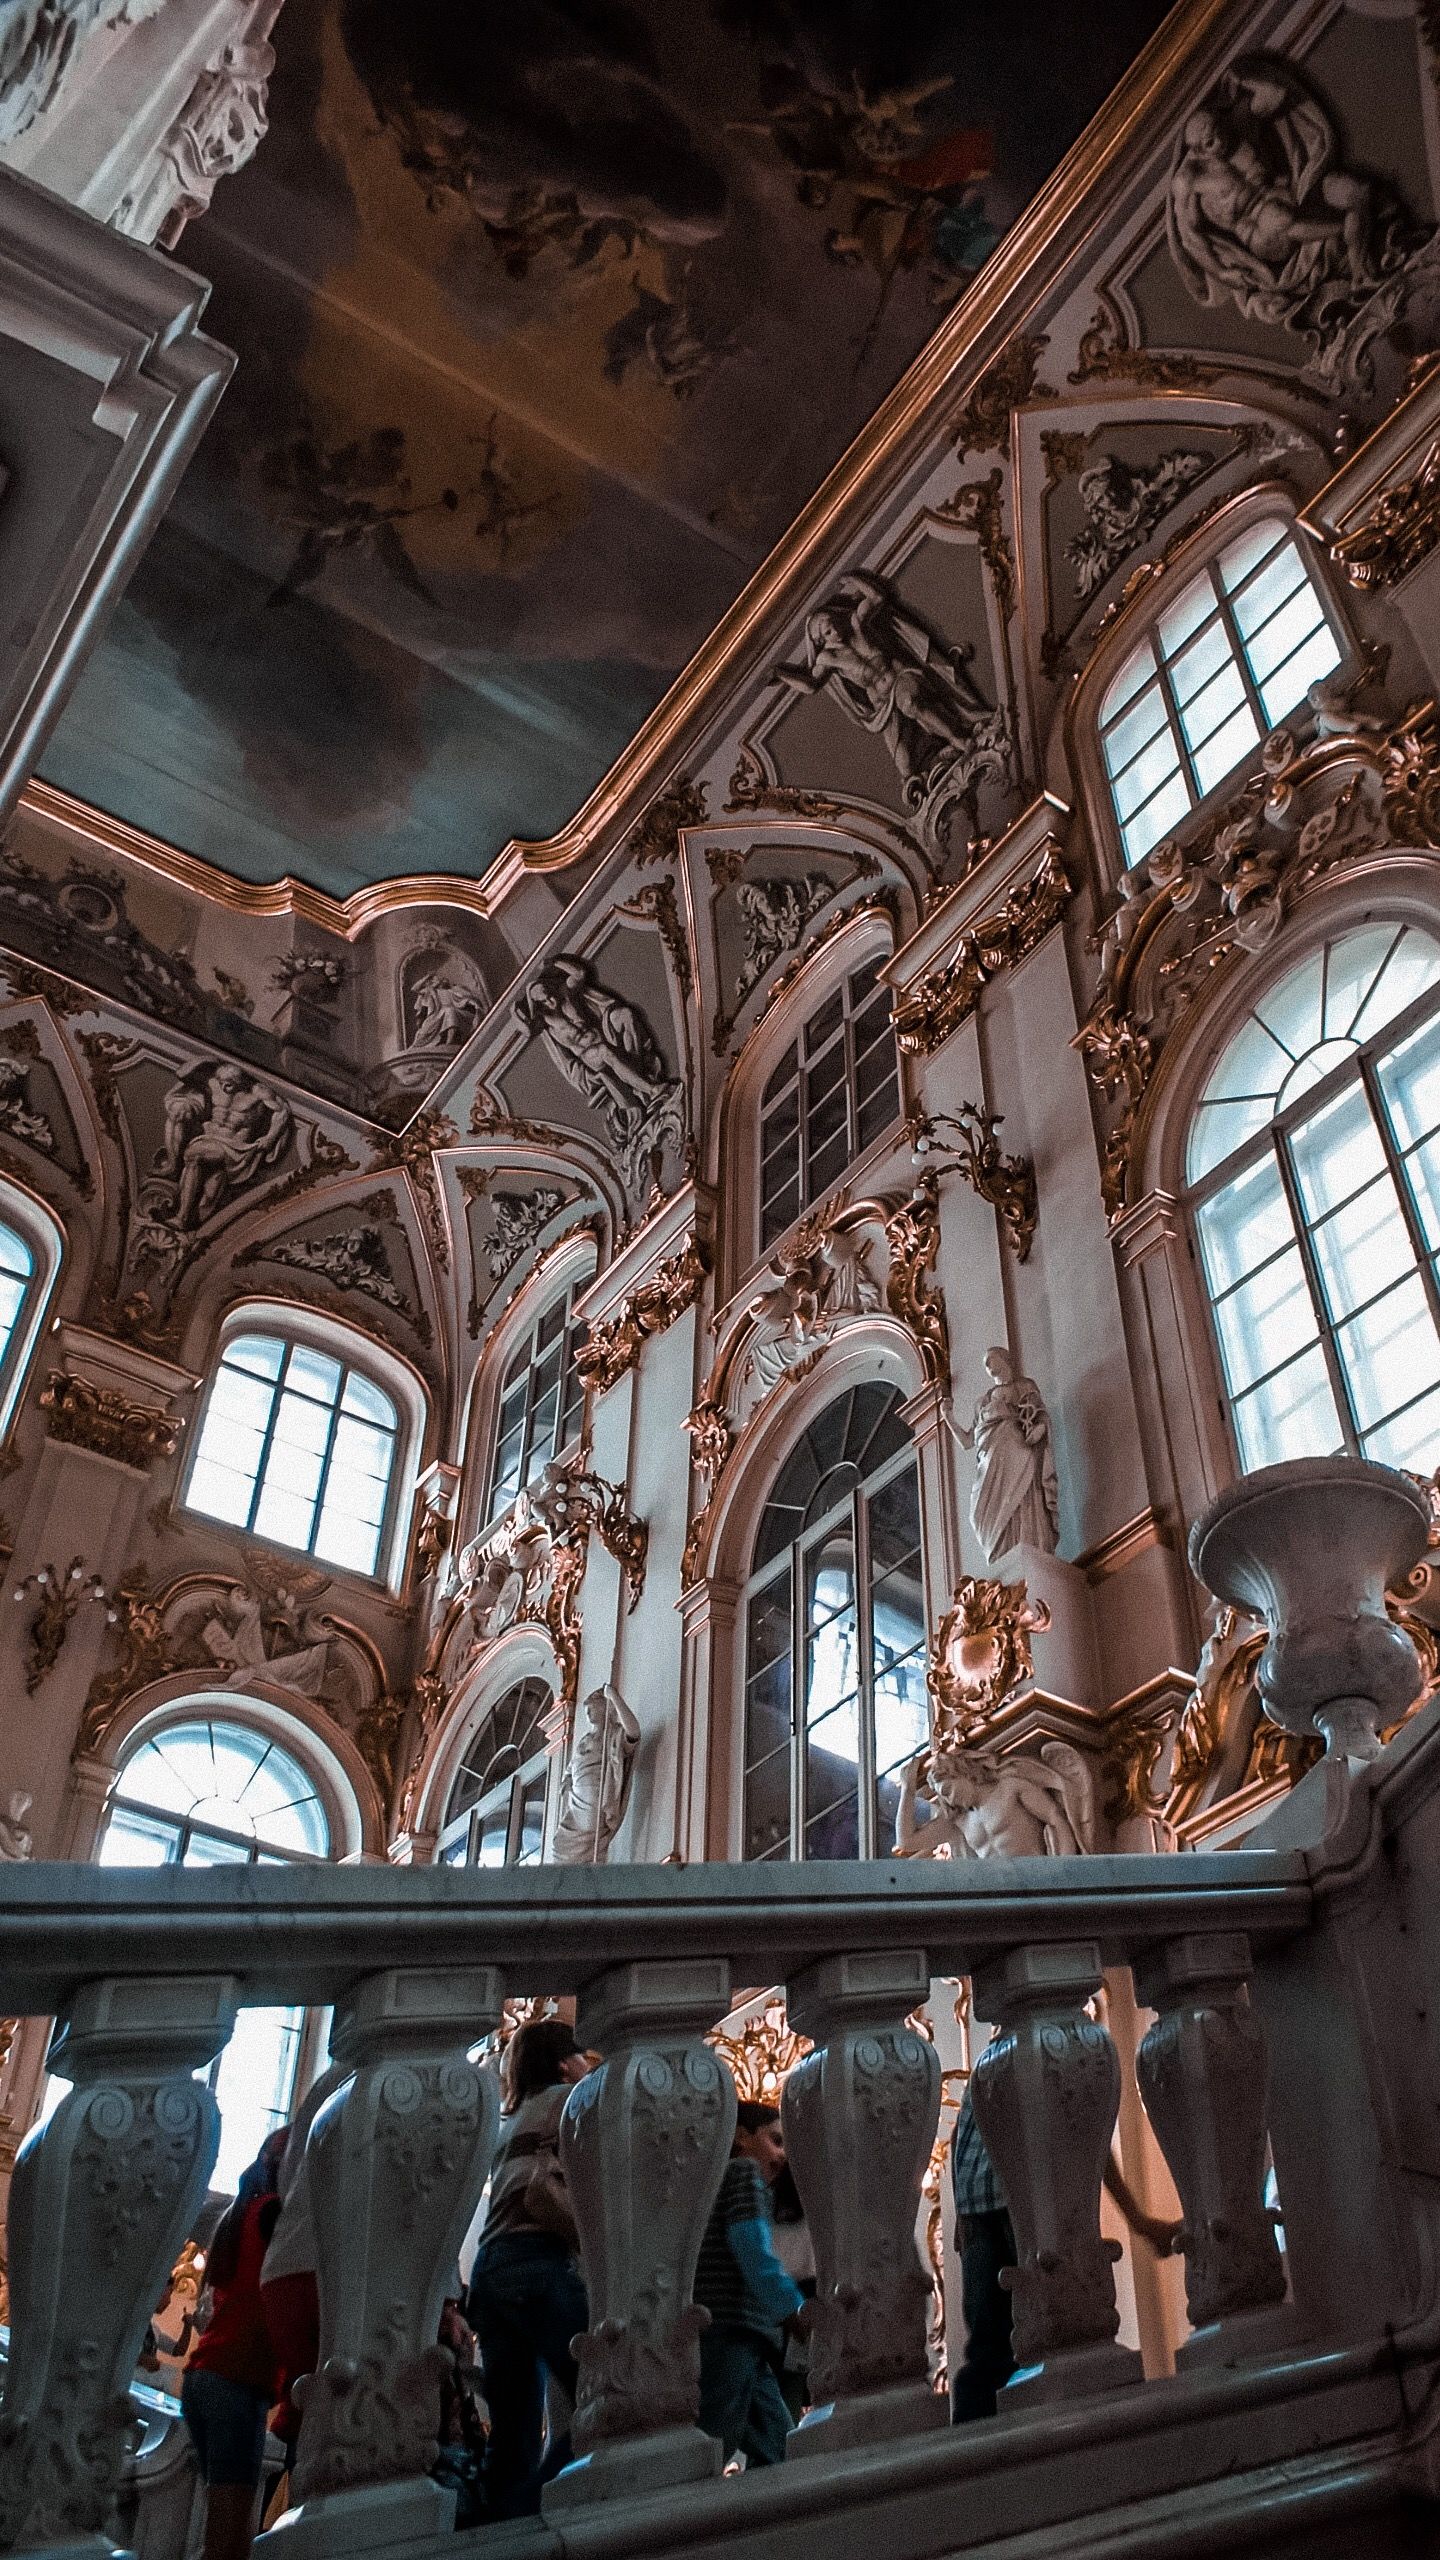 The grand staircase inside the Hermitage Museum - Architecture